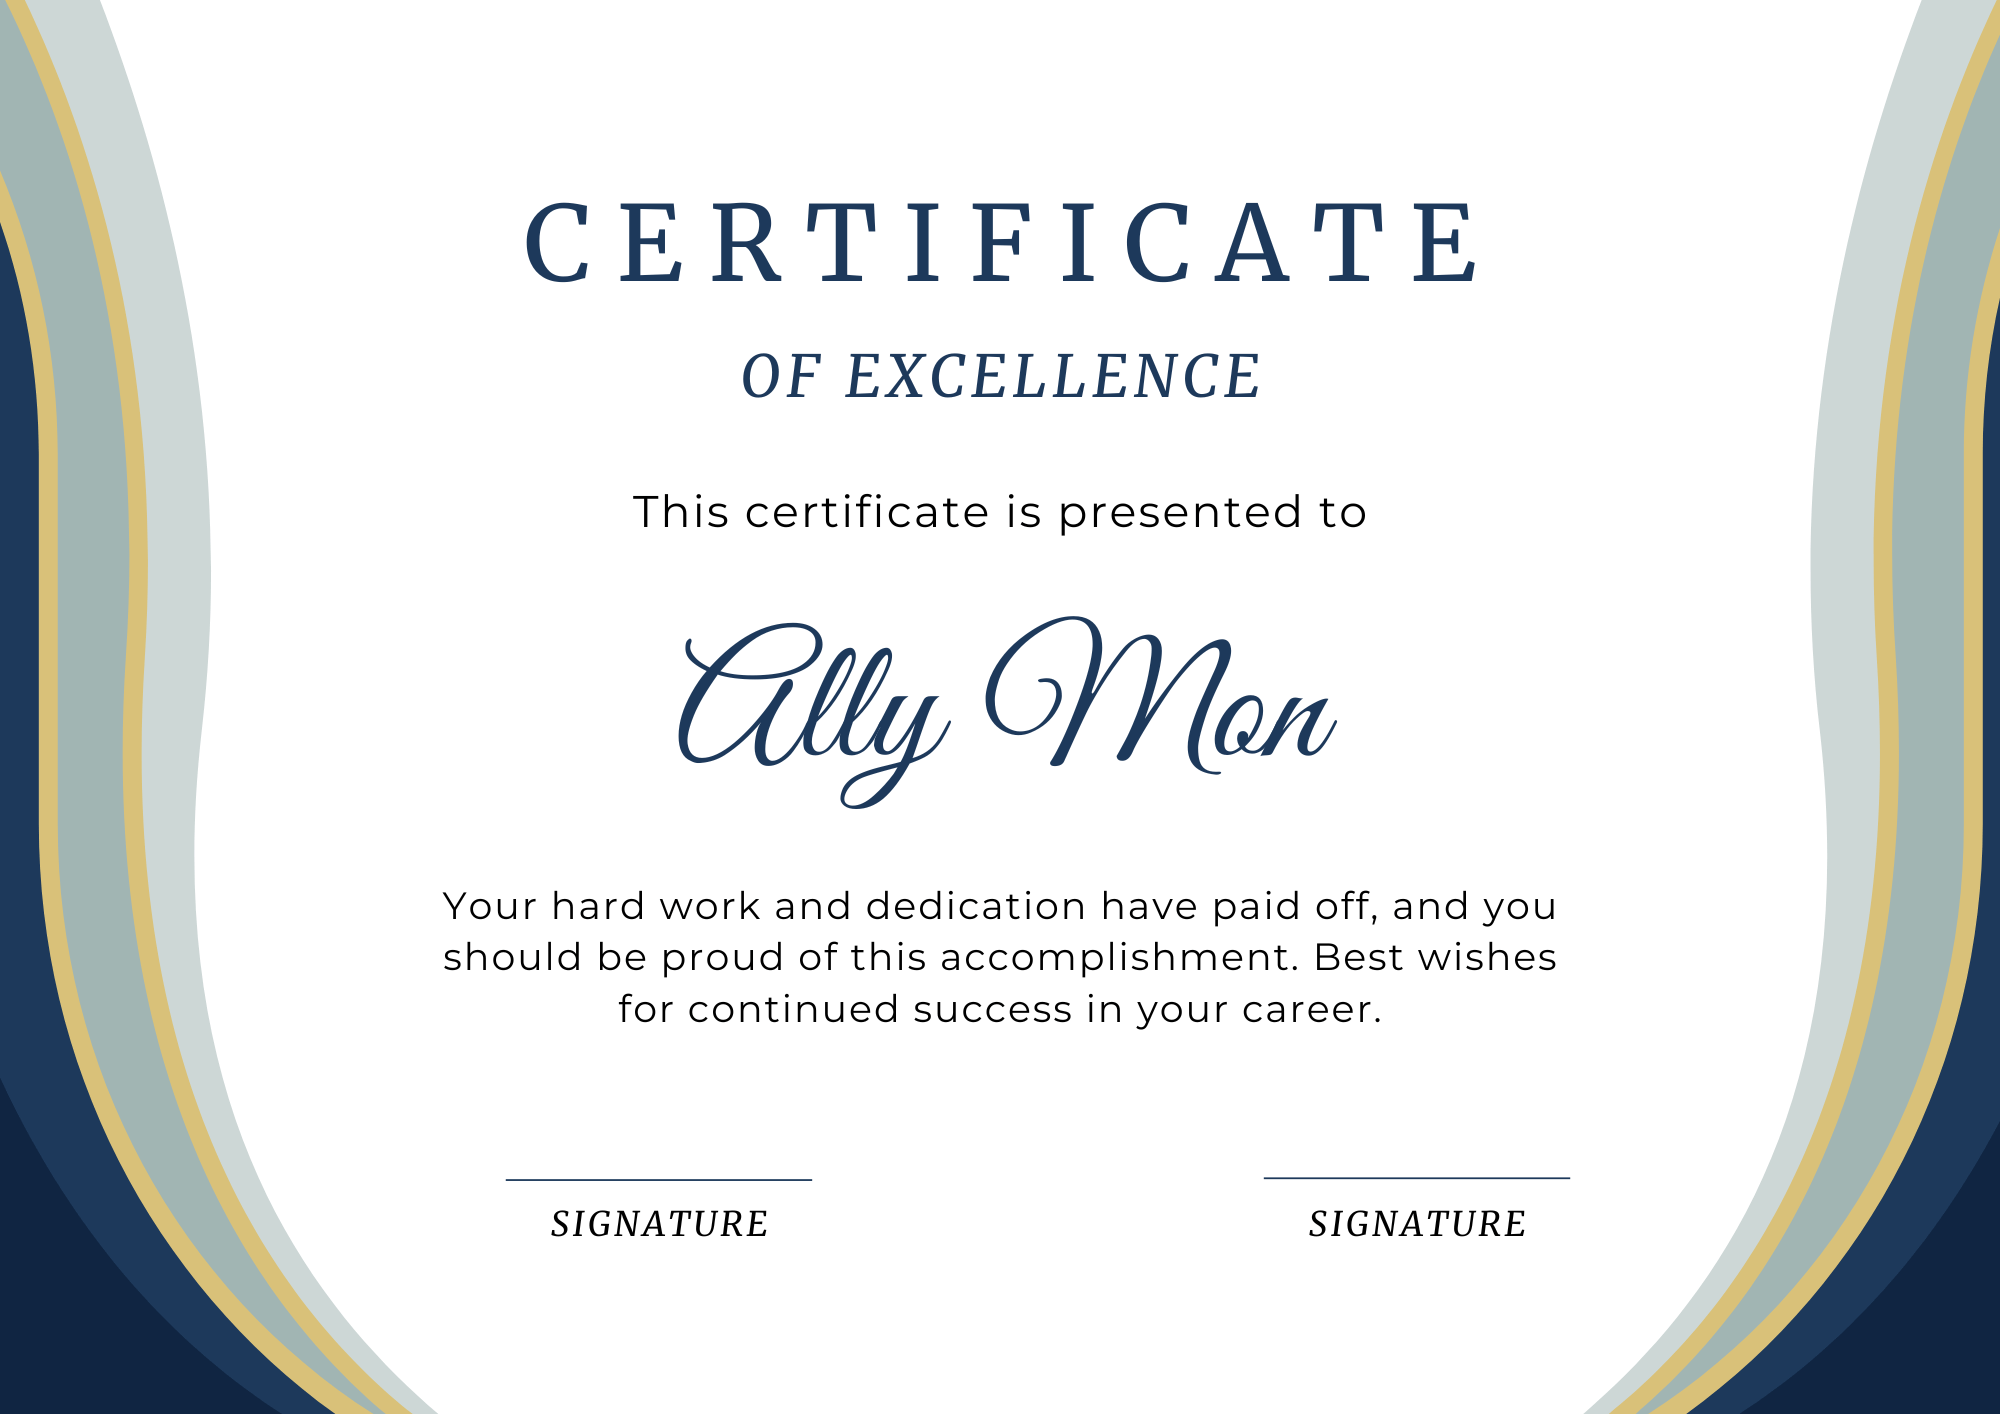 Certificate of Excellence template